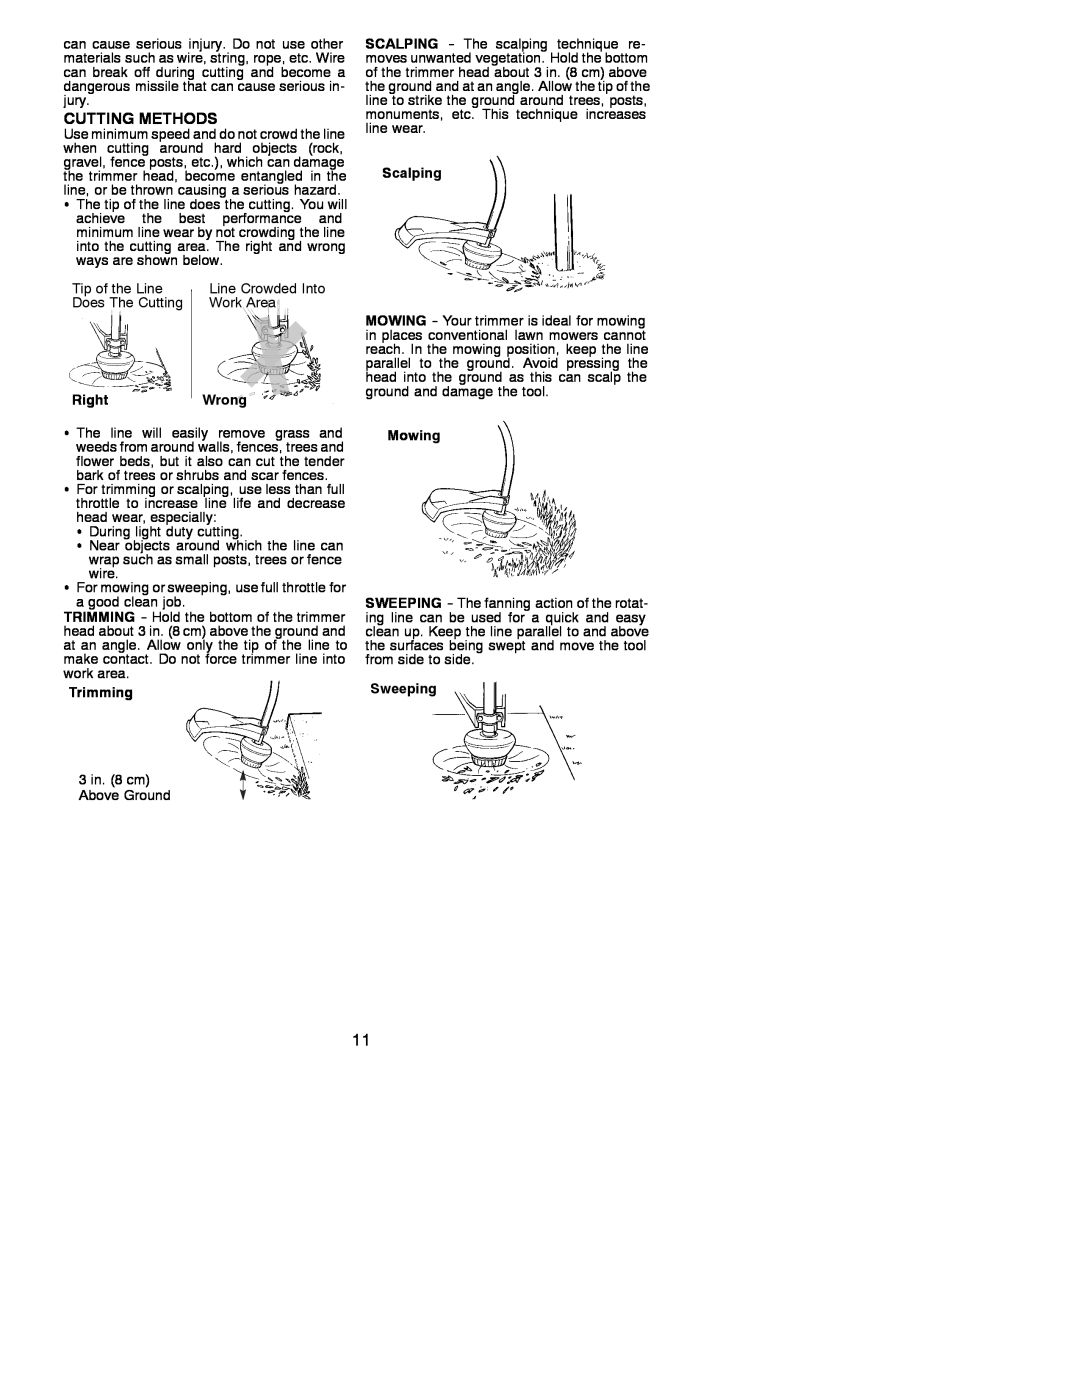 Weed Eater 530088154, 31WG instruction manual Cutting Methods, RightWrong, Trimming, Scalping, Mowing, Sweeping 